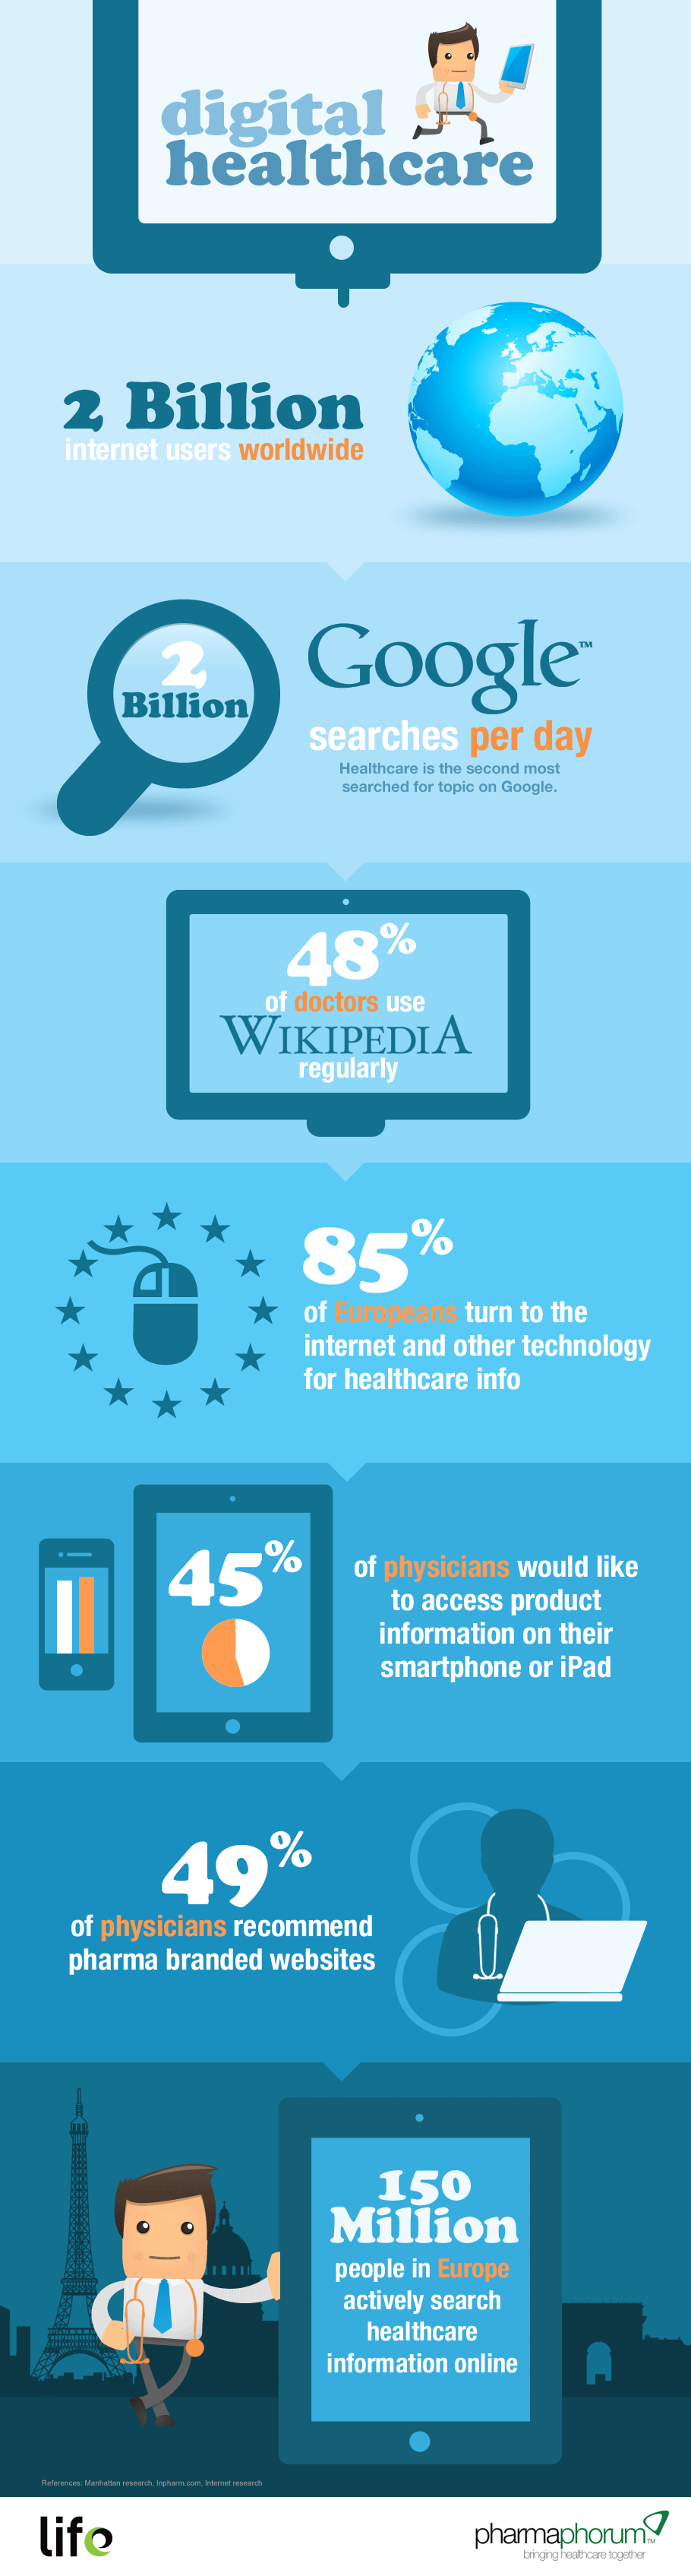 Digital in Healthcare Infographic